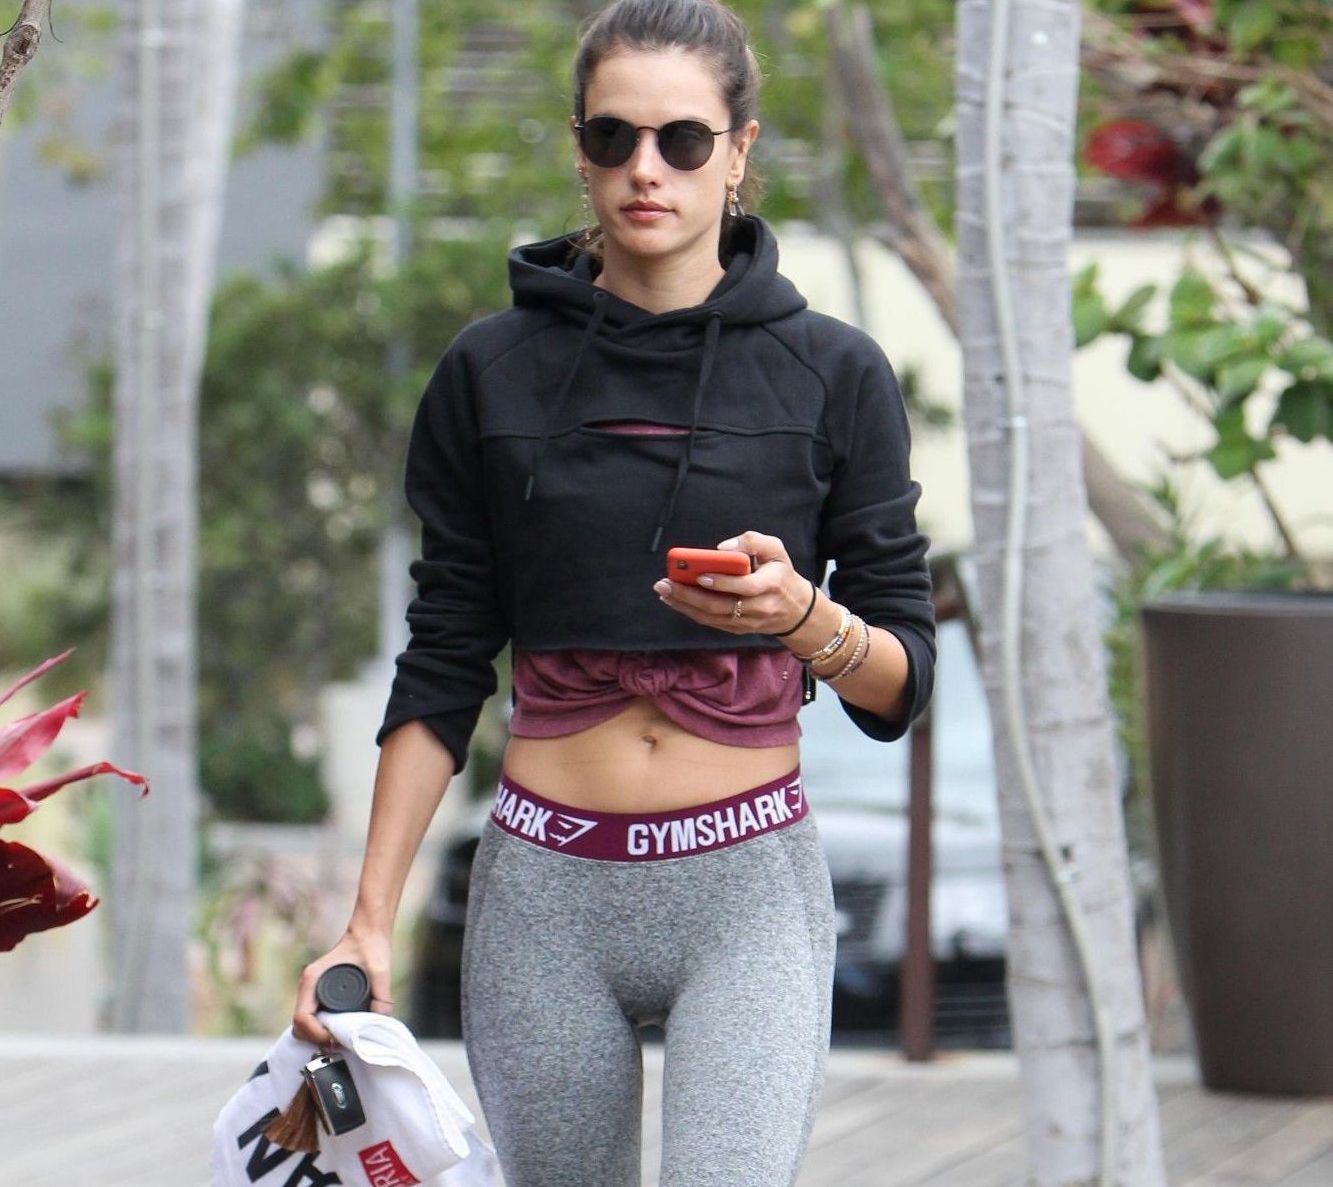 Passed R Lean fashionable work out leggings Archives - Daily Candid News